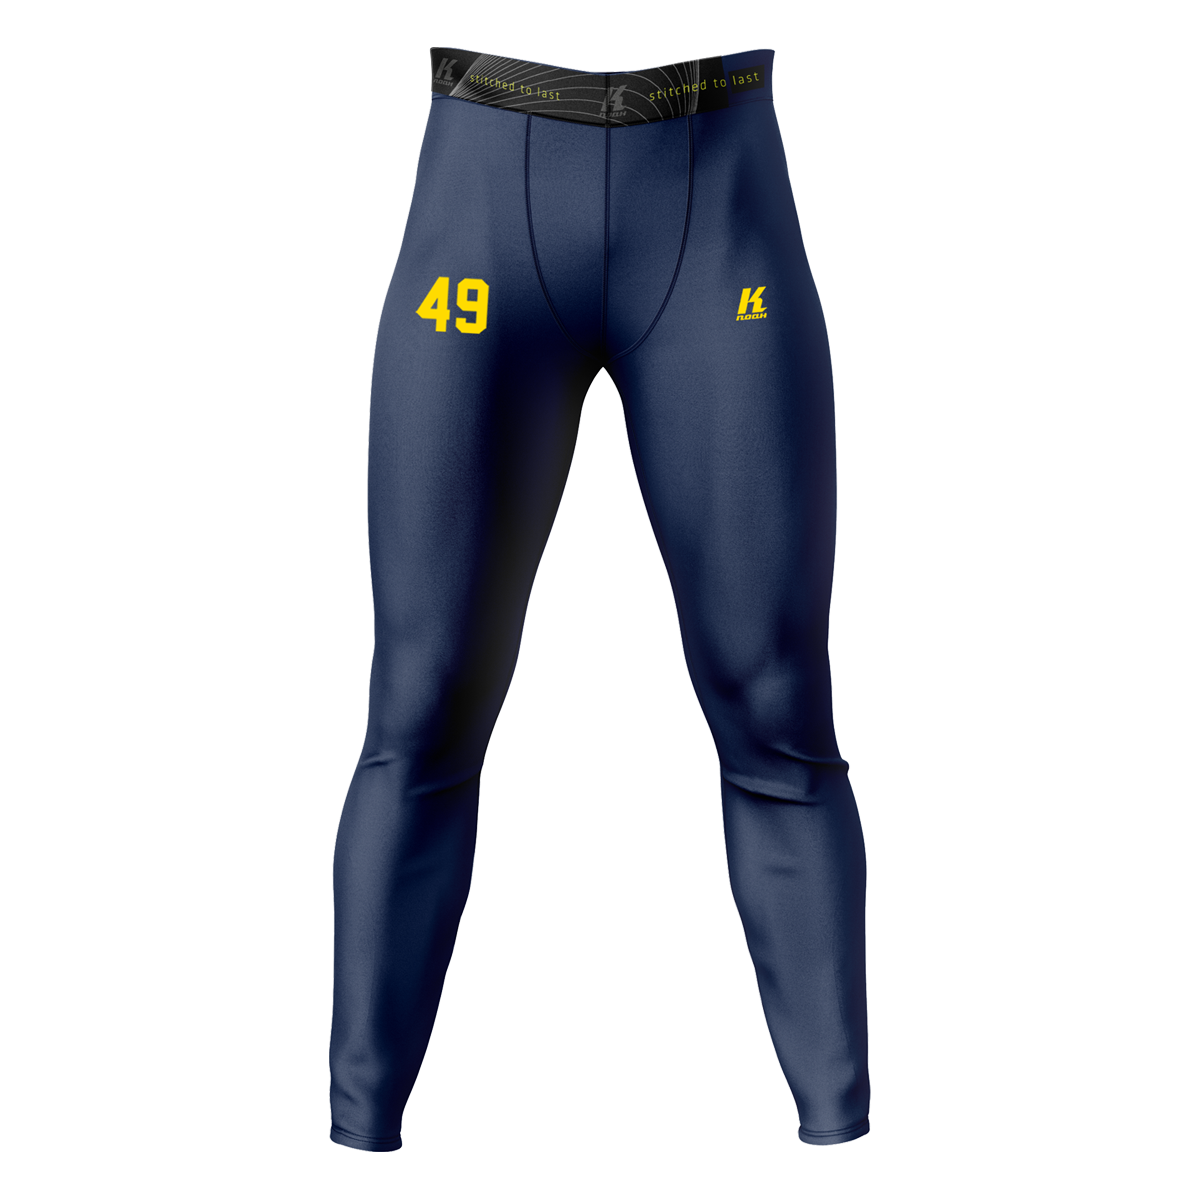 HSC K.Tech Compression Pant BA0514 with Playernumber/Initials